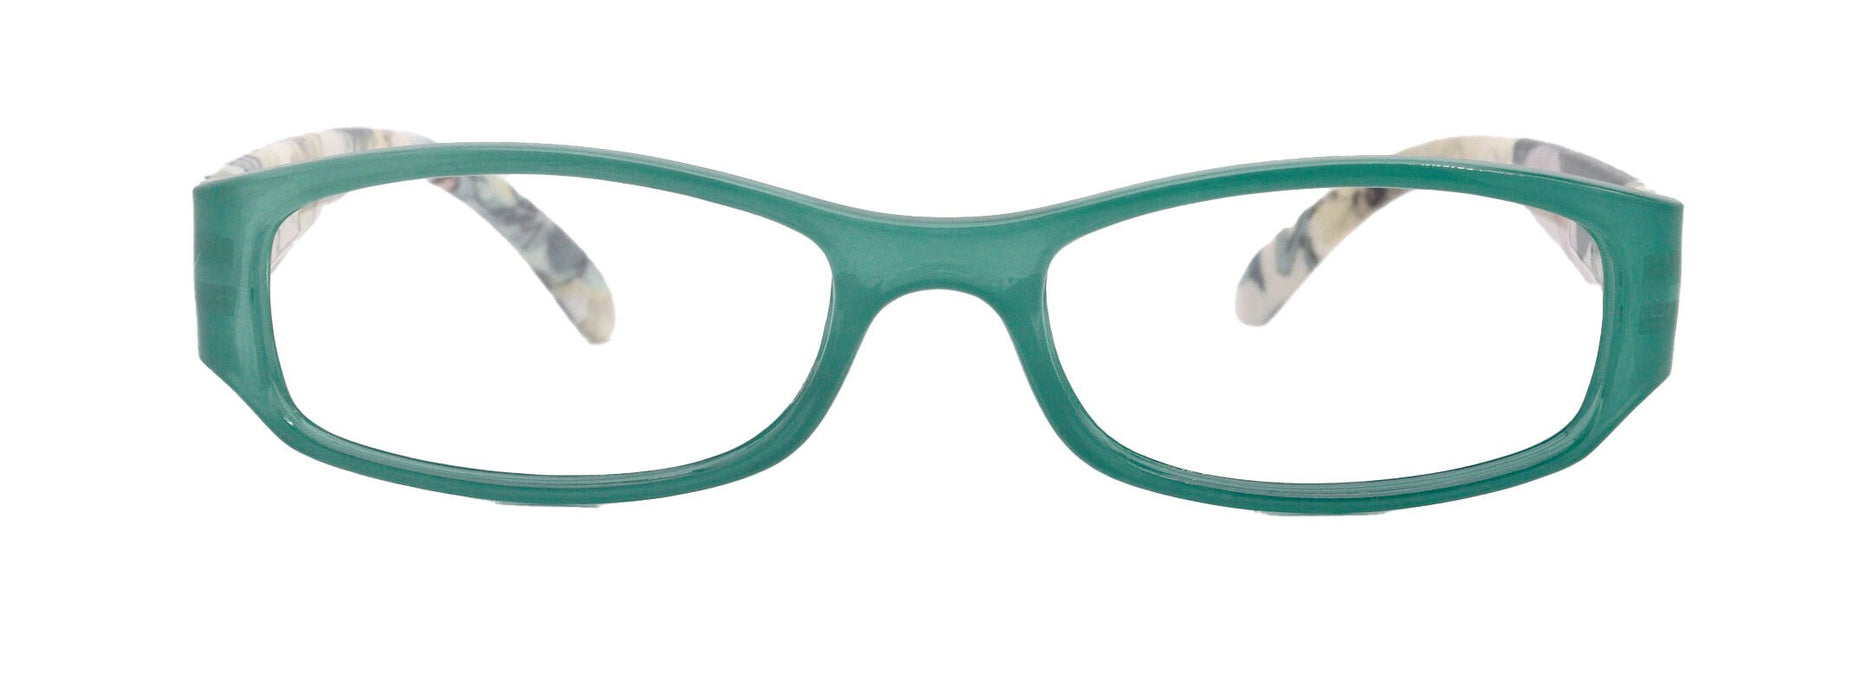 Rosie Premium Reading Glasses, Fashion Reader (Flower Turquoise / Green) Print, Oval Shape +4 High Magnification, NY Fifth Avenue